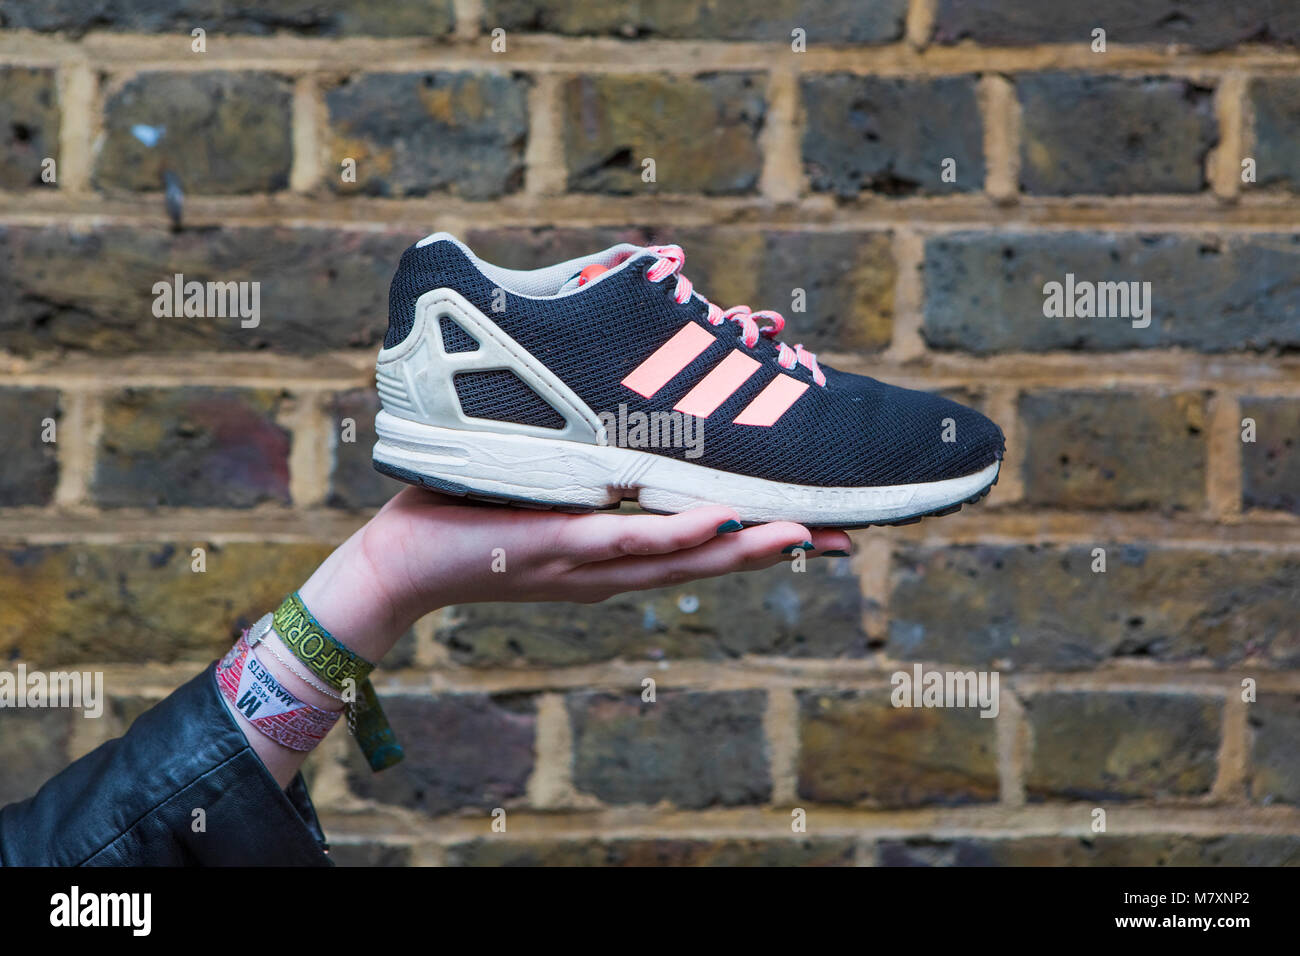 Cool vintage black Adidas trainer with pink stripes held by a woman. Stock Photo